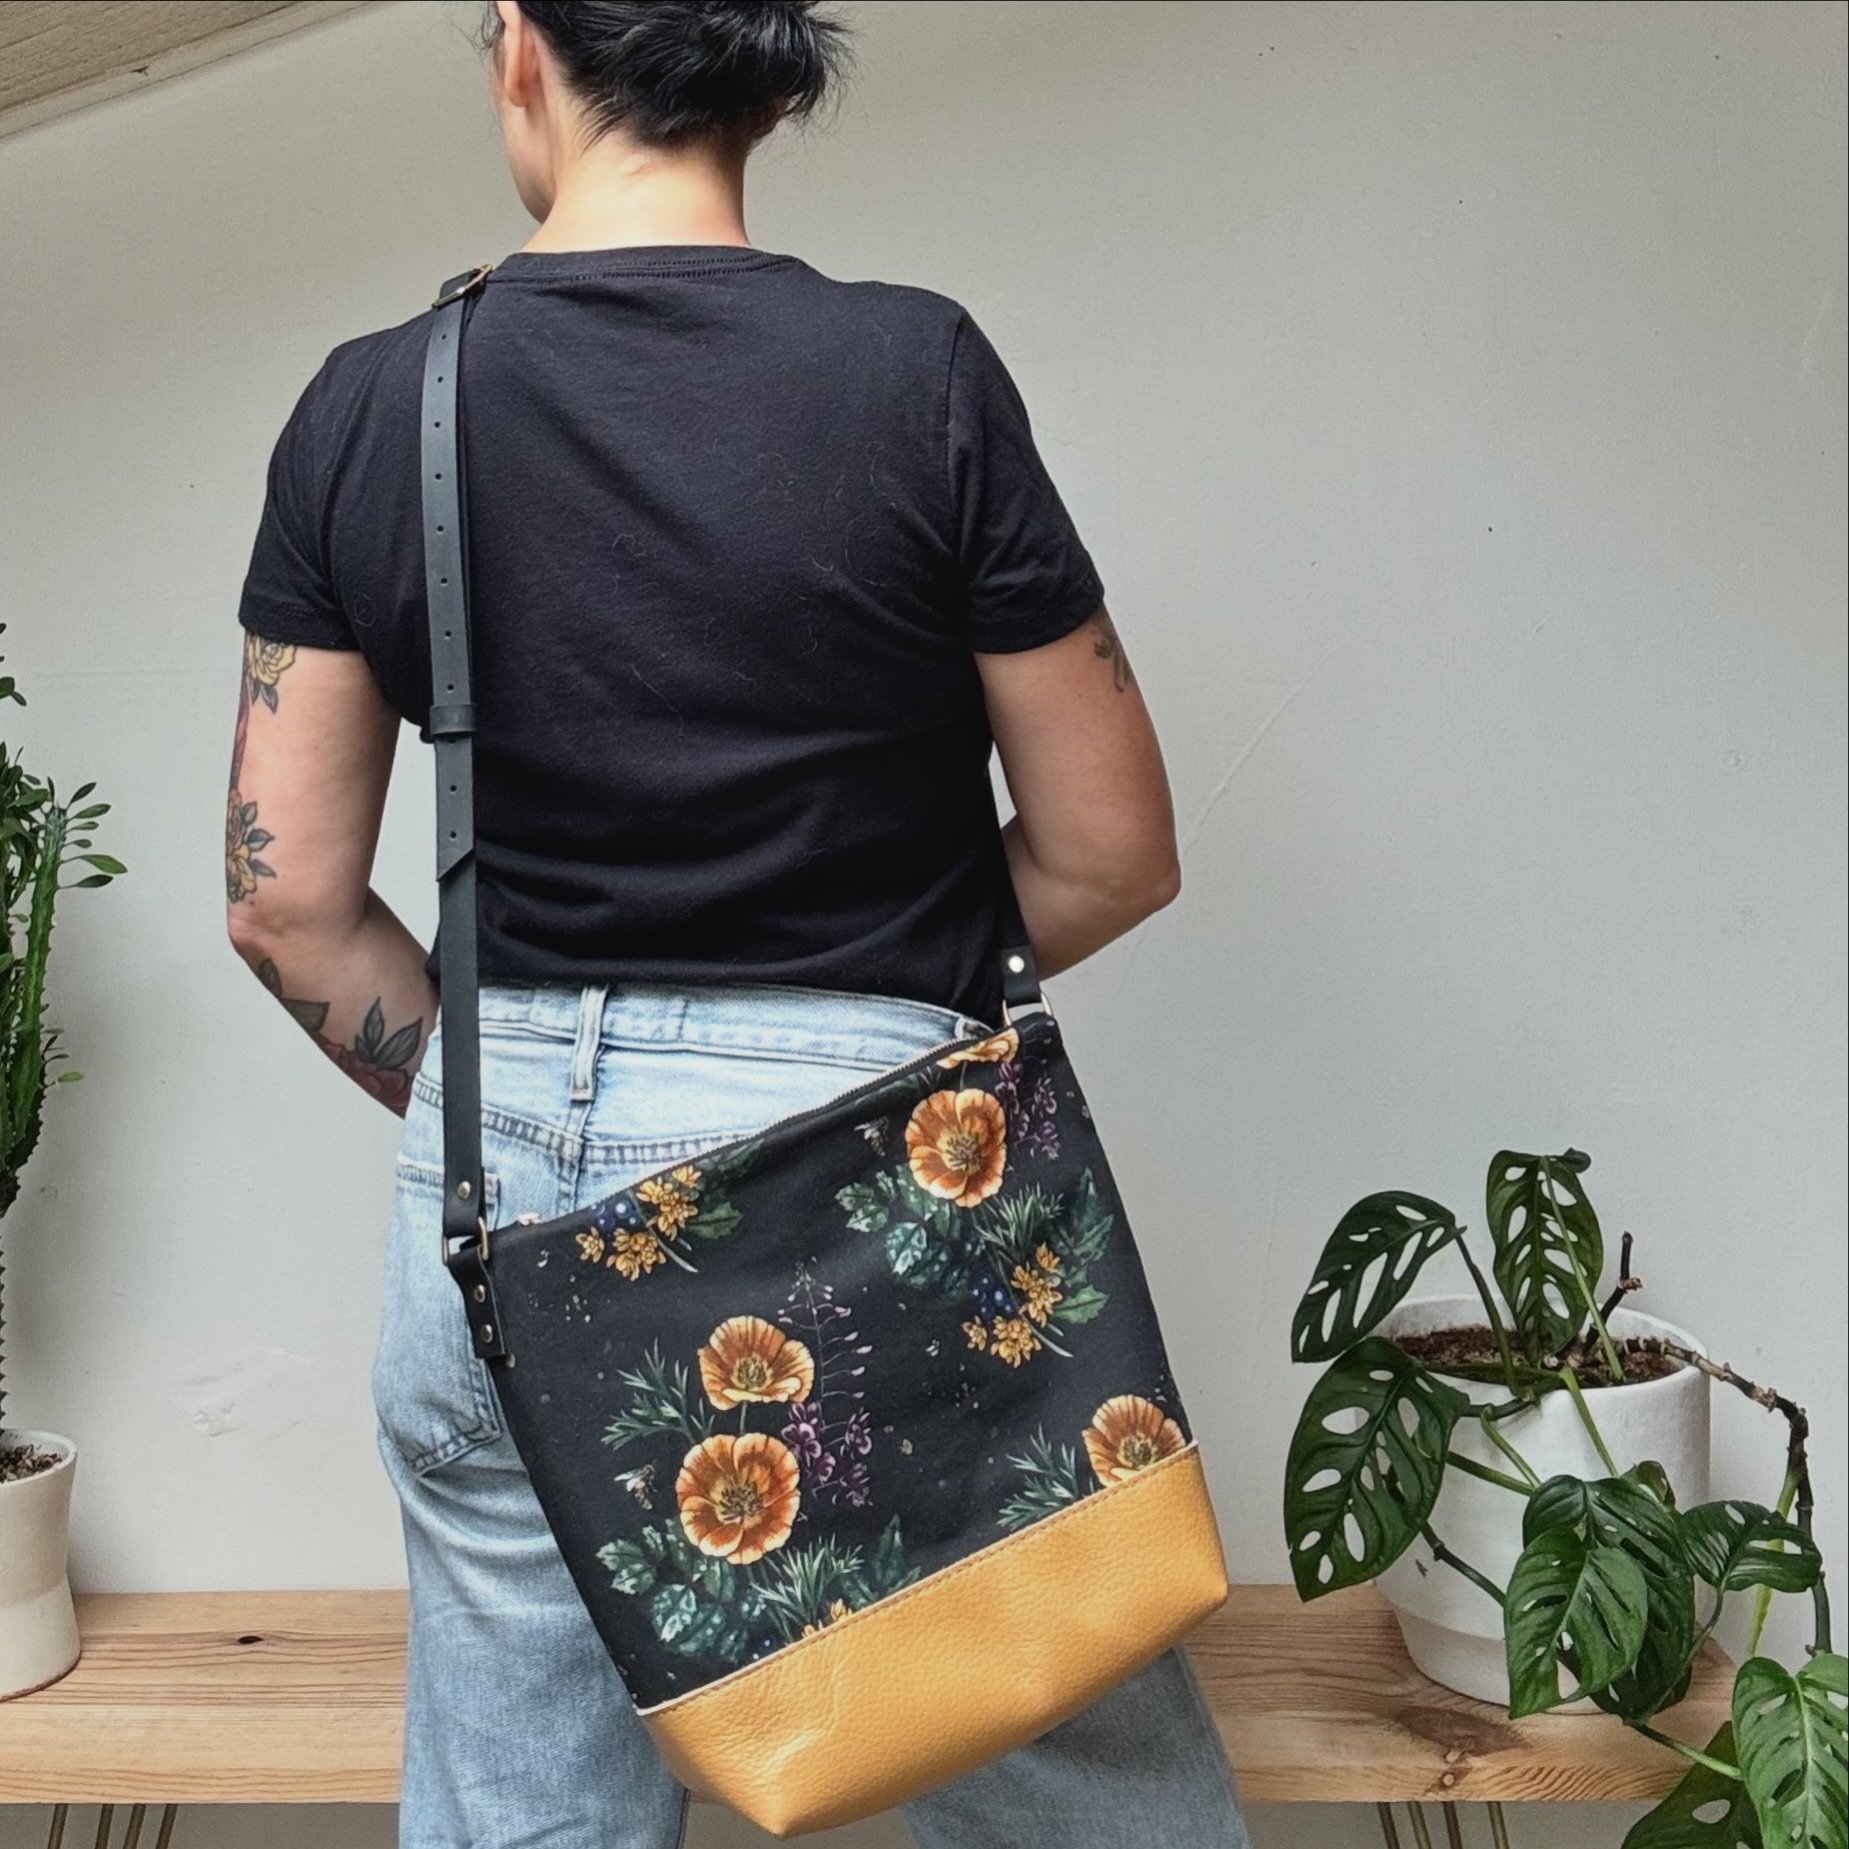 Bringing back one of the favorite designs by @alicestattoos in our new bag style, the Coco Crossbody. Looking fab in California Poppy, Alaskan Fireweed, Oregon Grape and Honey Bee 🐝 with black or camel leather bottom. Has 4 interior pockets for orga